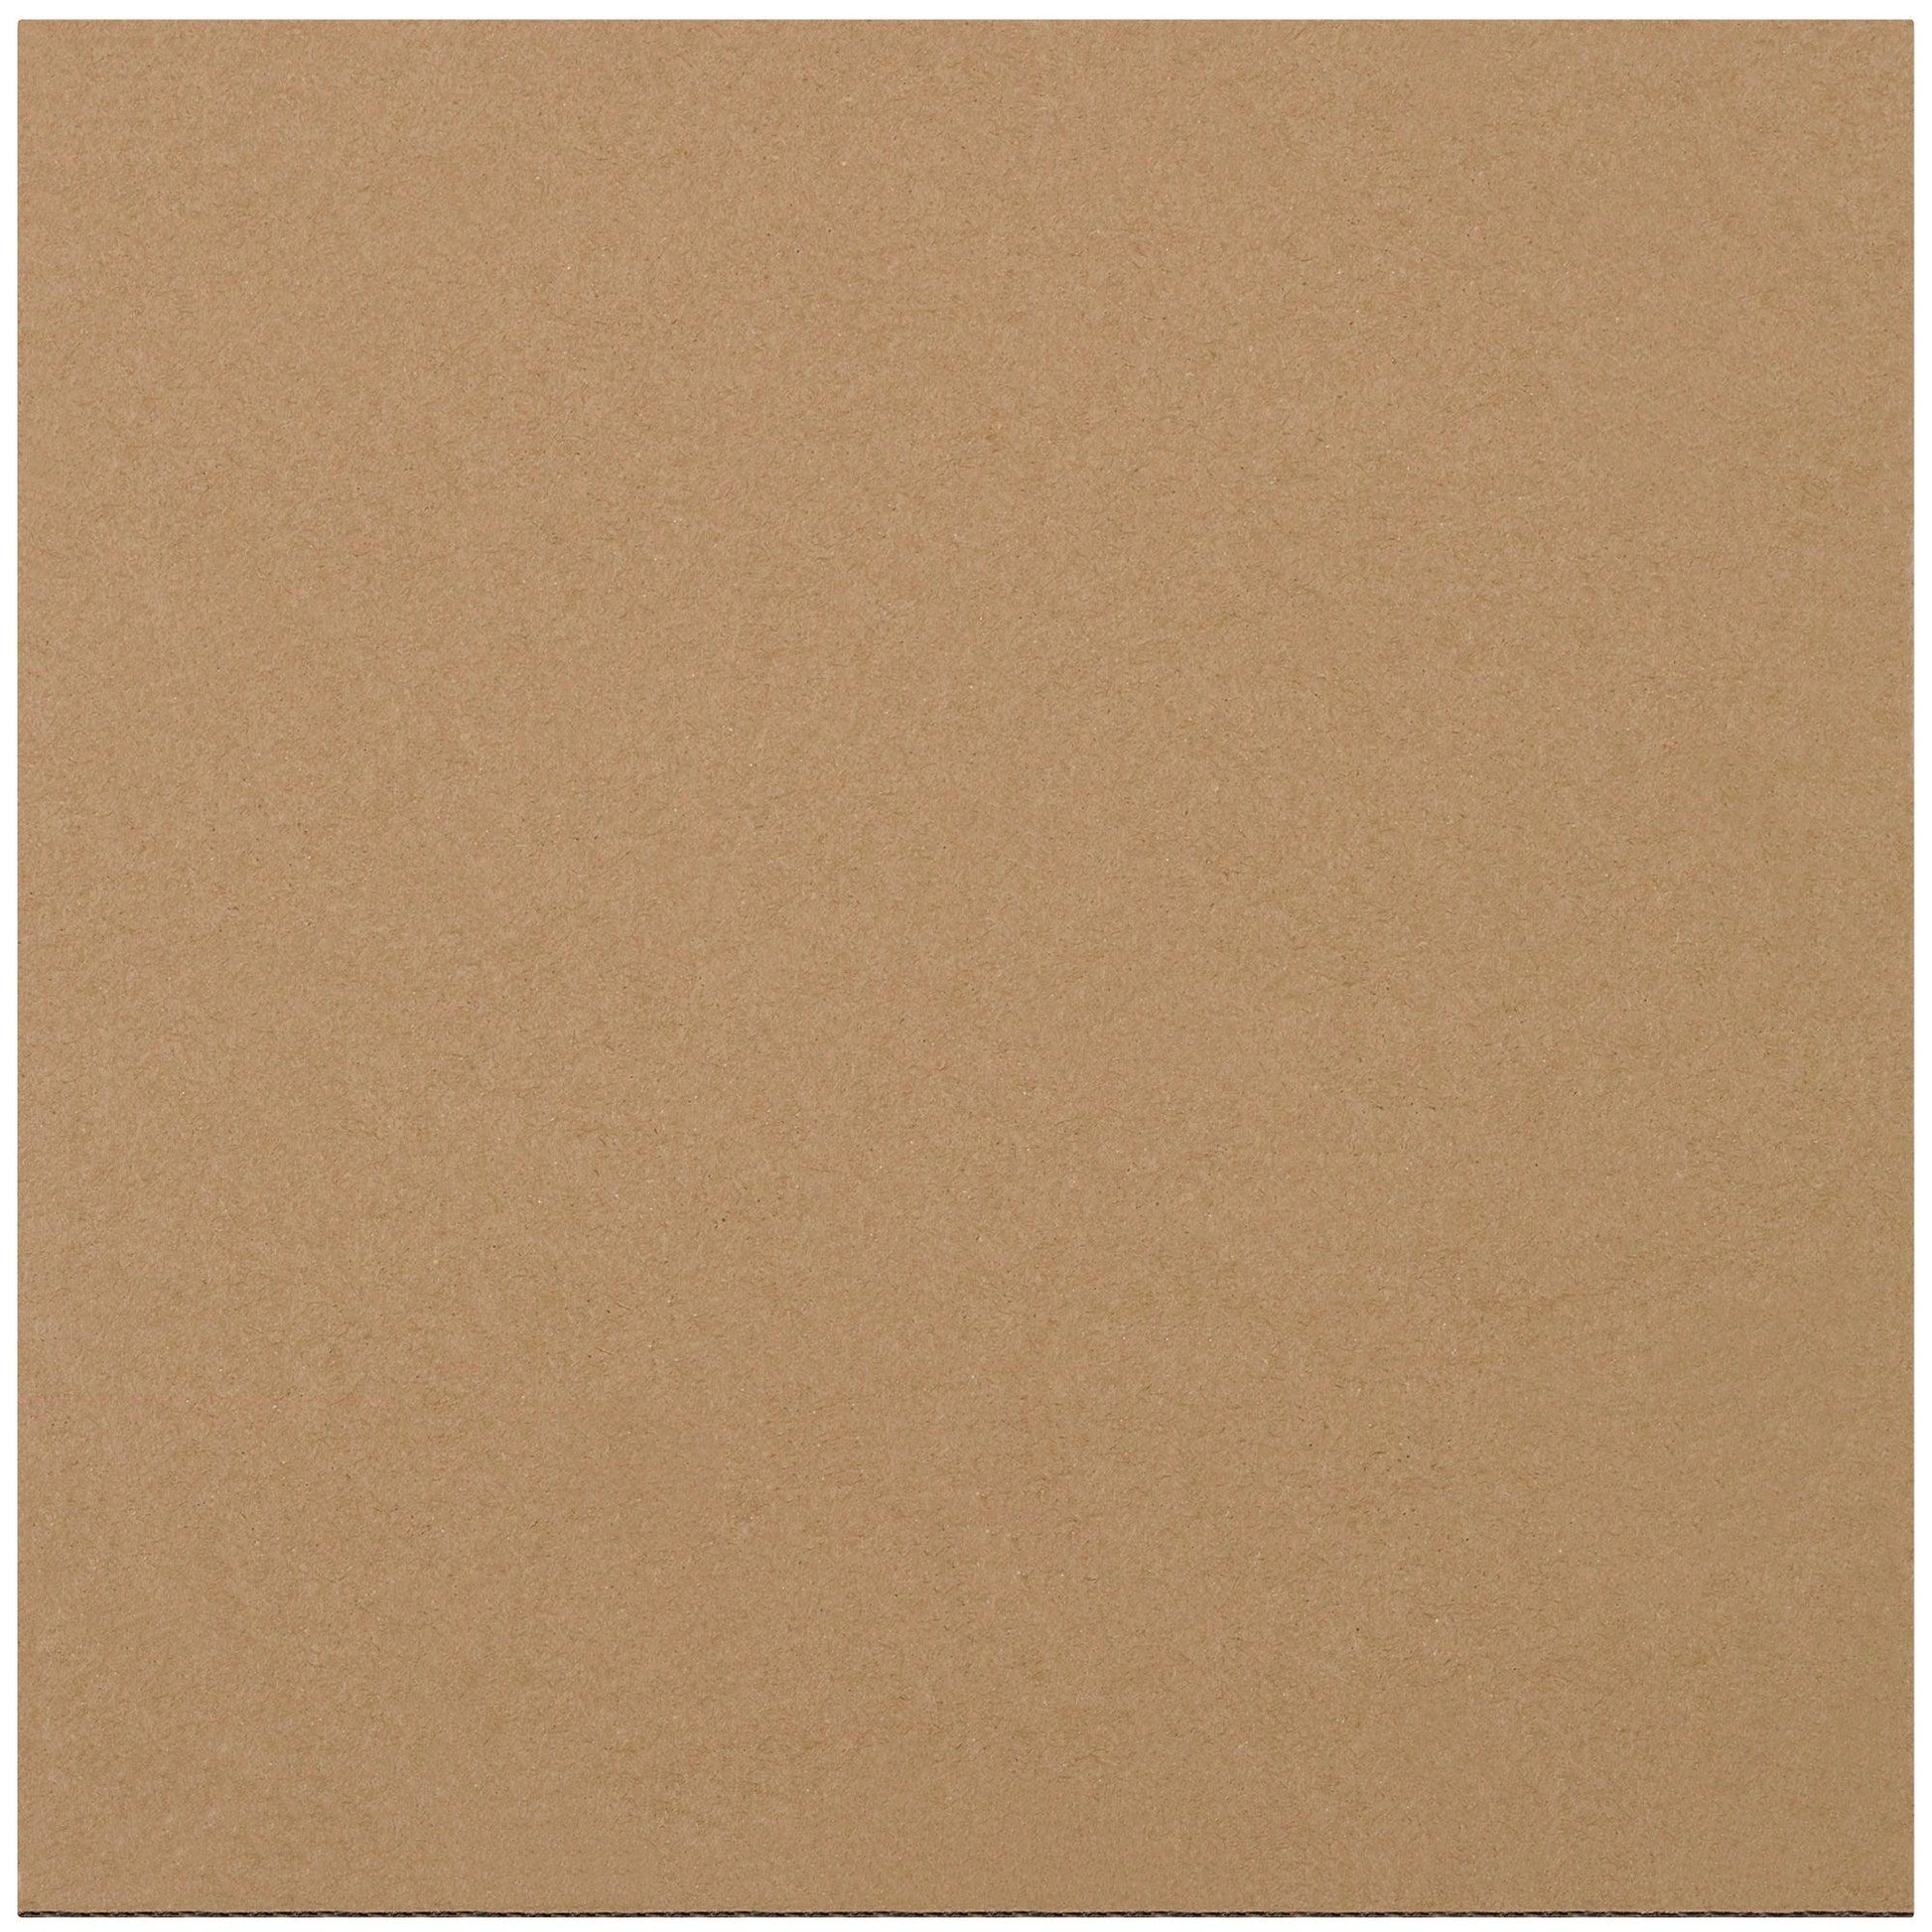 11 7/8 x 11 7/8" Corrugated Layer Pads - SP11